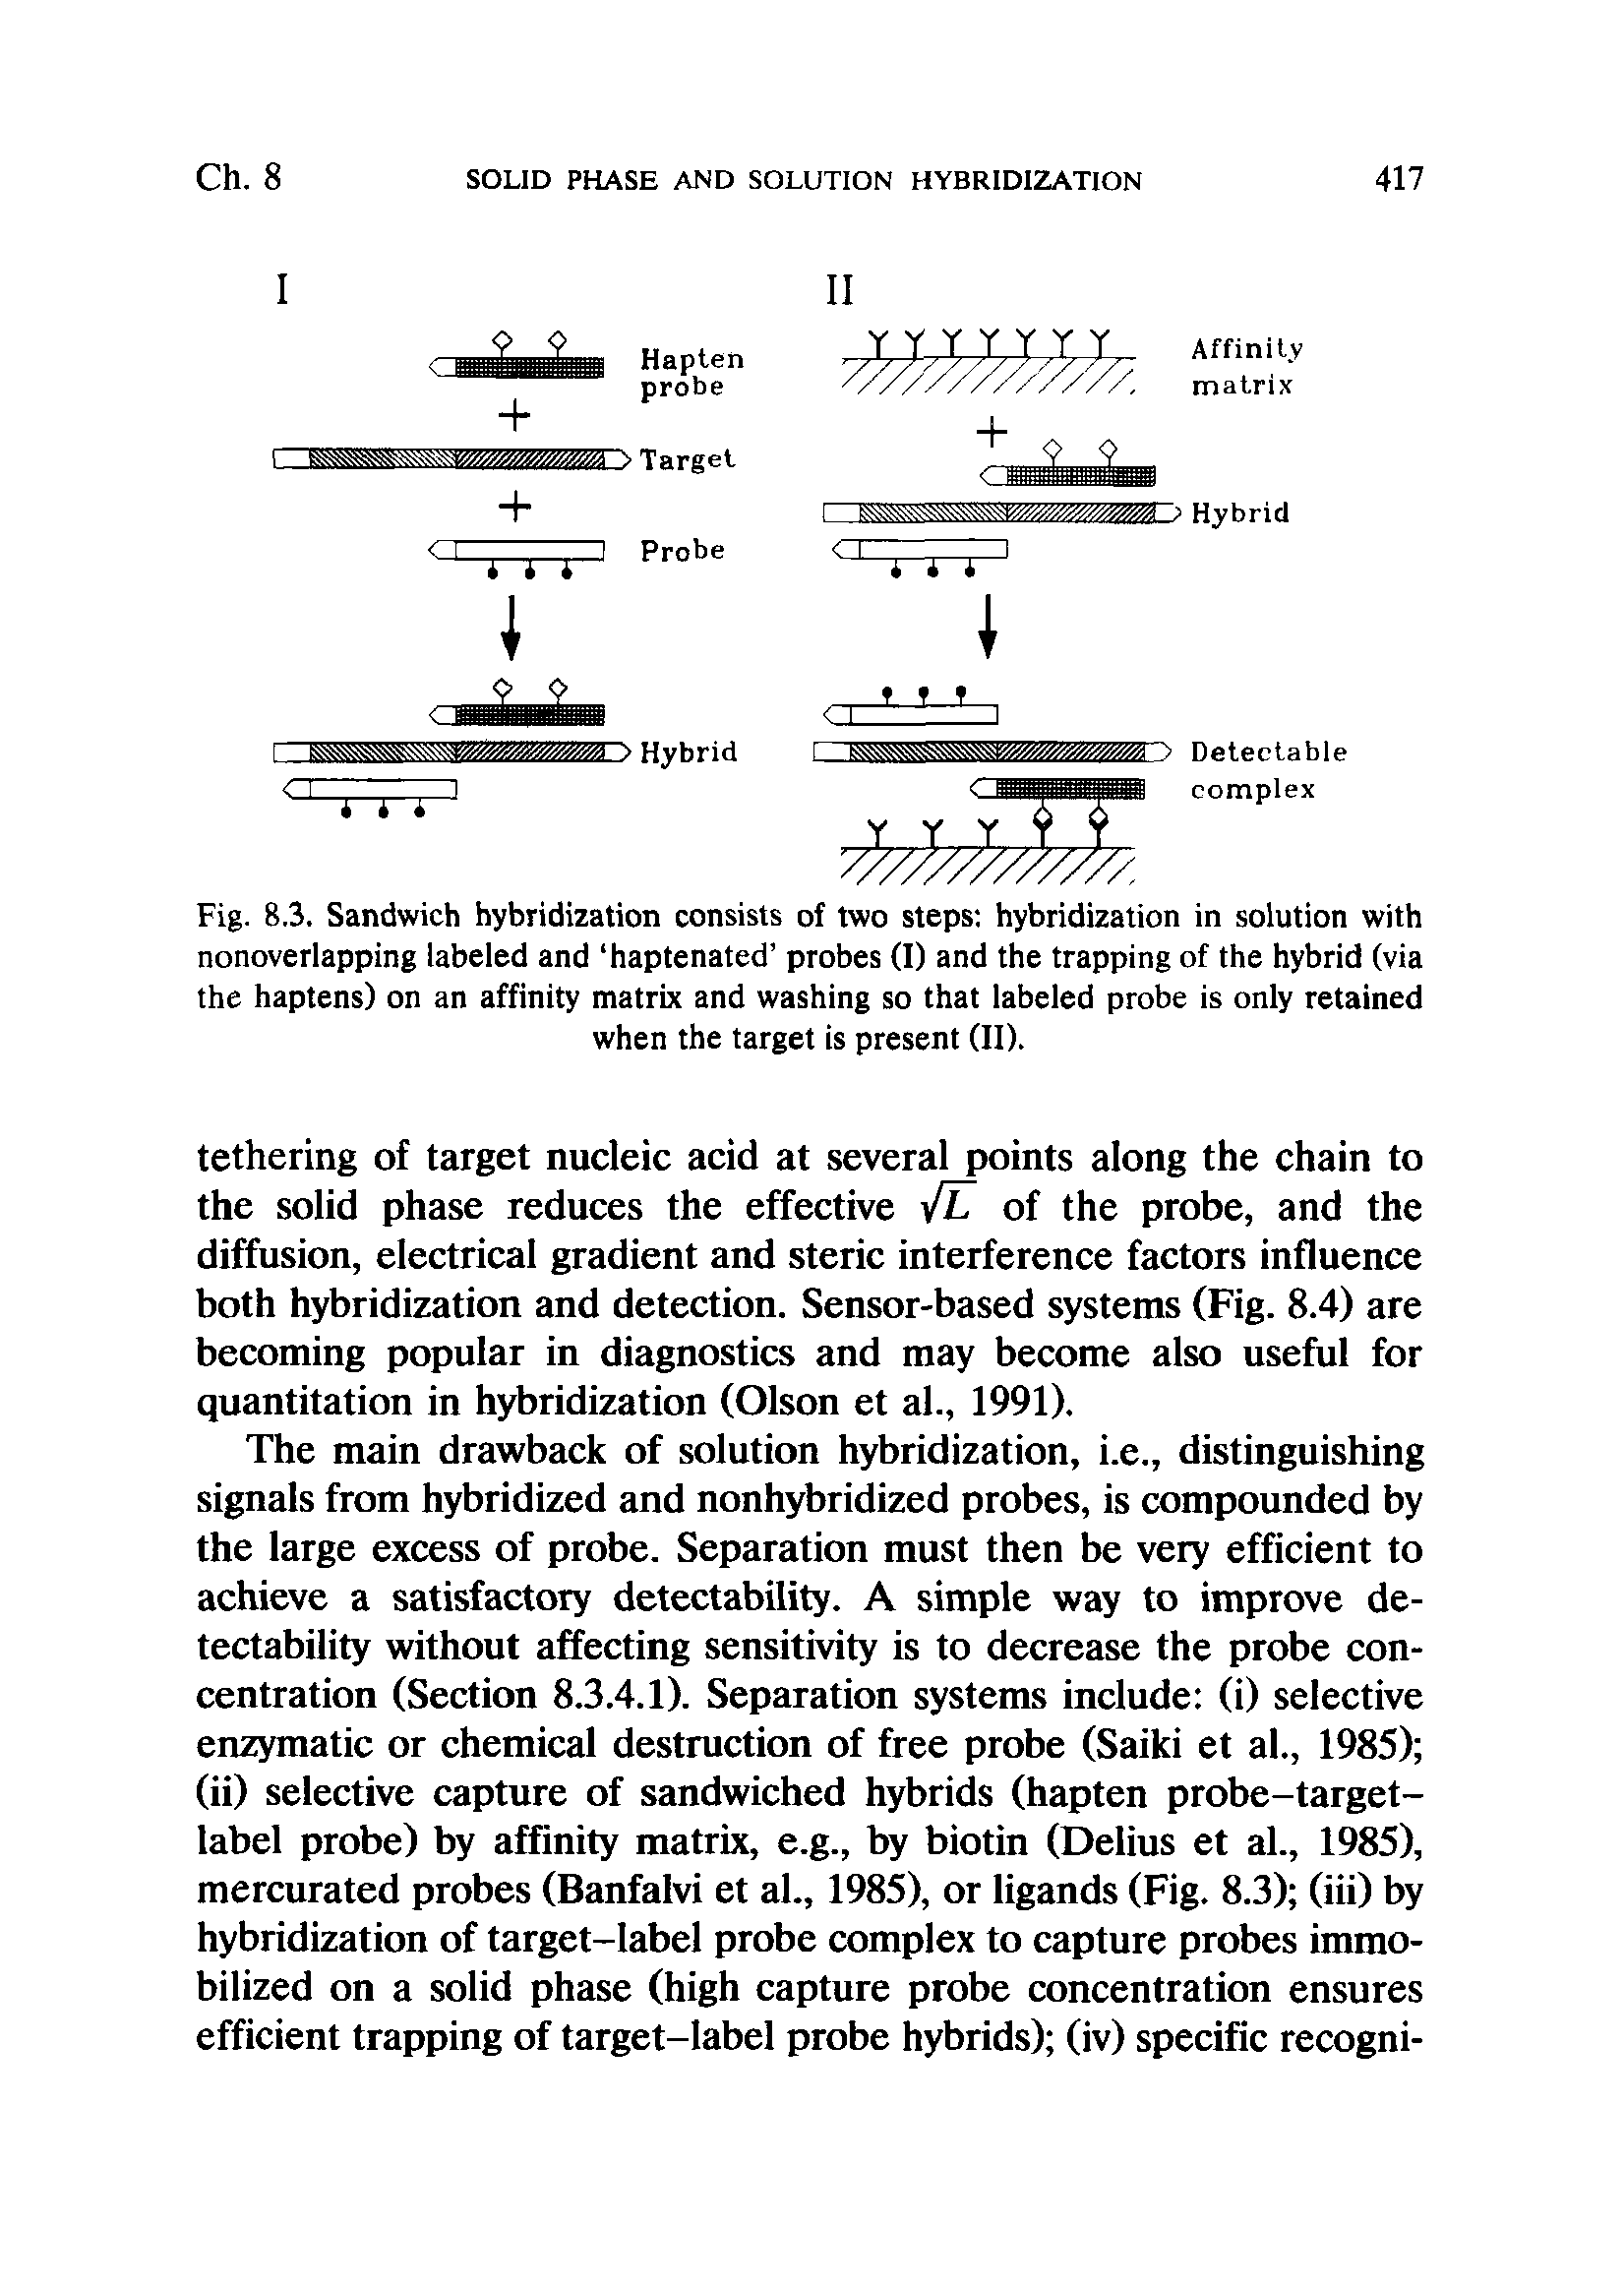 Fig. 8.3. Sandwich hybridization consists of two steps hybridization in solution with nonoverlapping labeled and haptenated probes (I) and the trapping of the hybrid (via the haptens) on an affinity matrix and washing so that labeled probe is only retained when the target is present (ID.